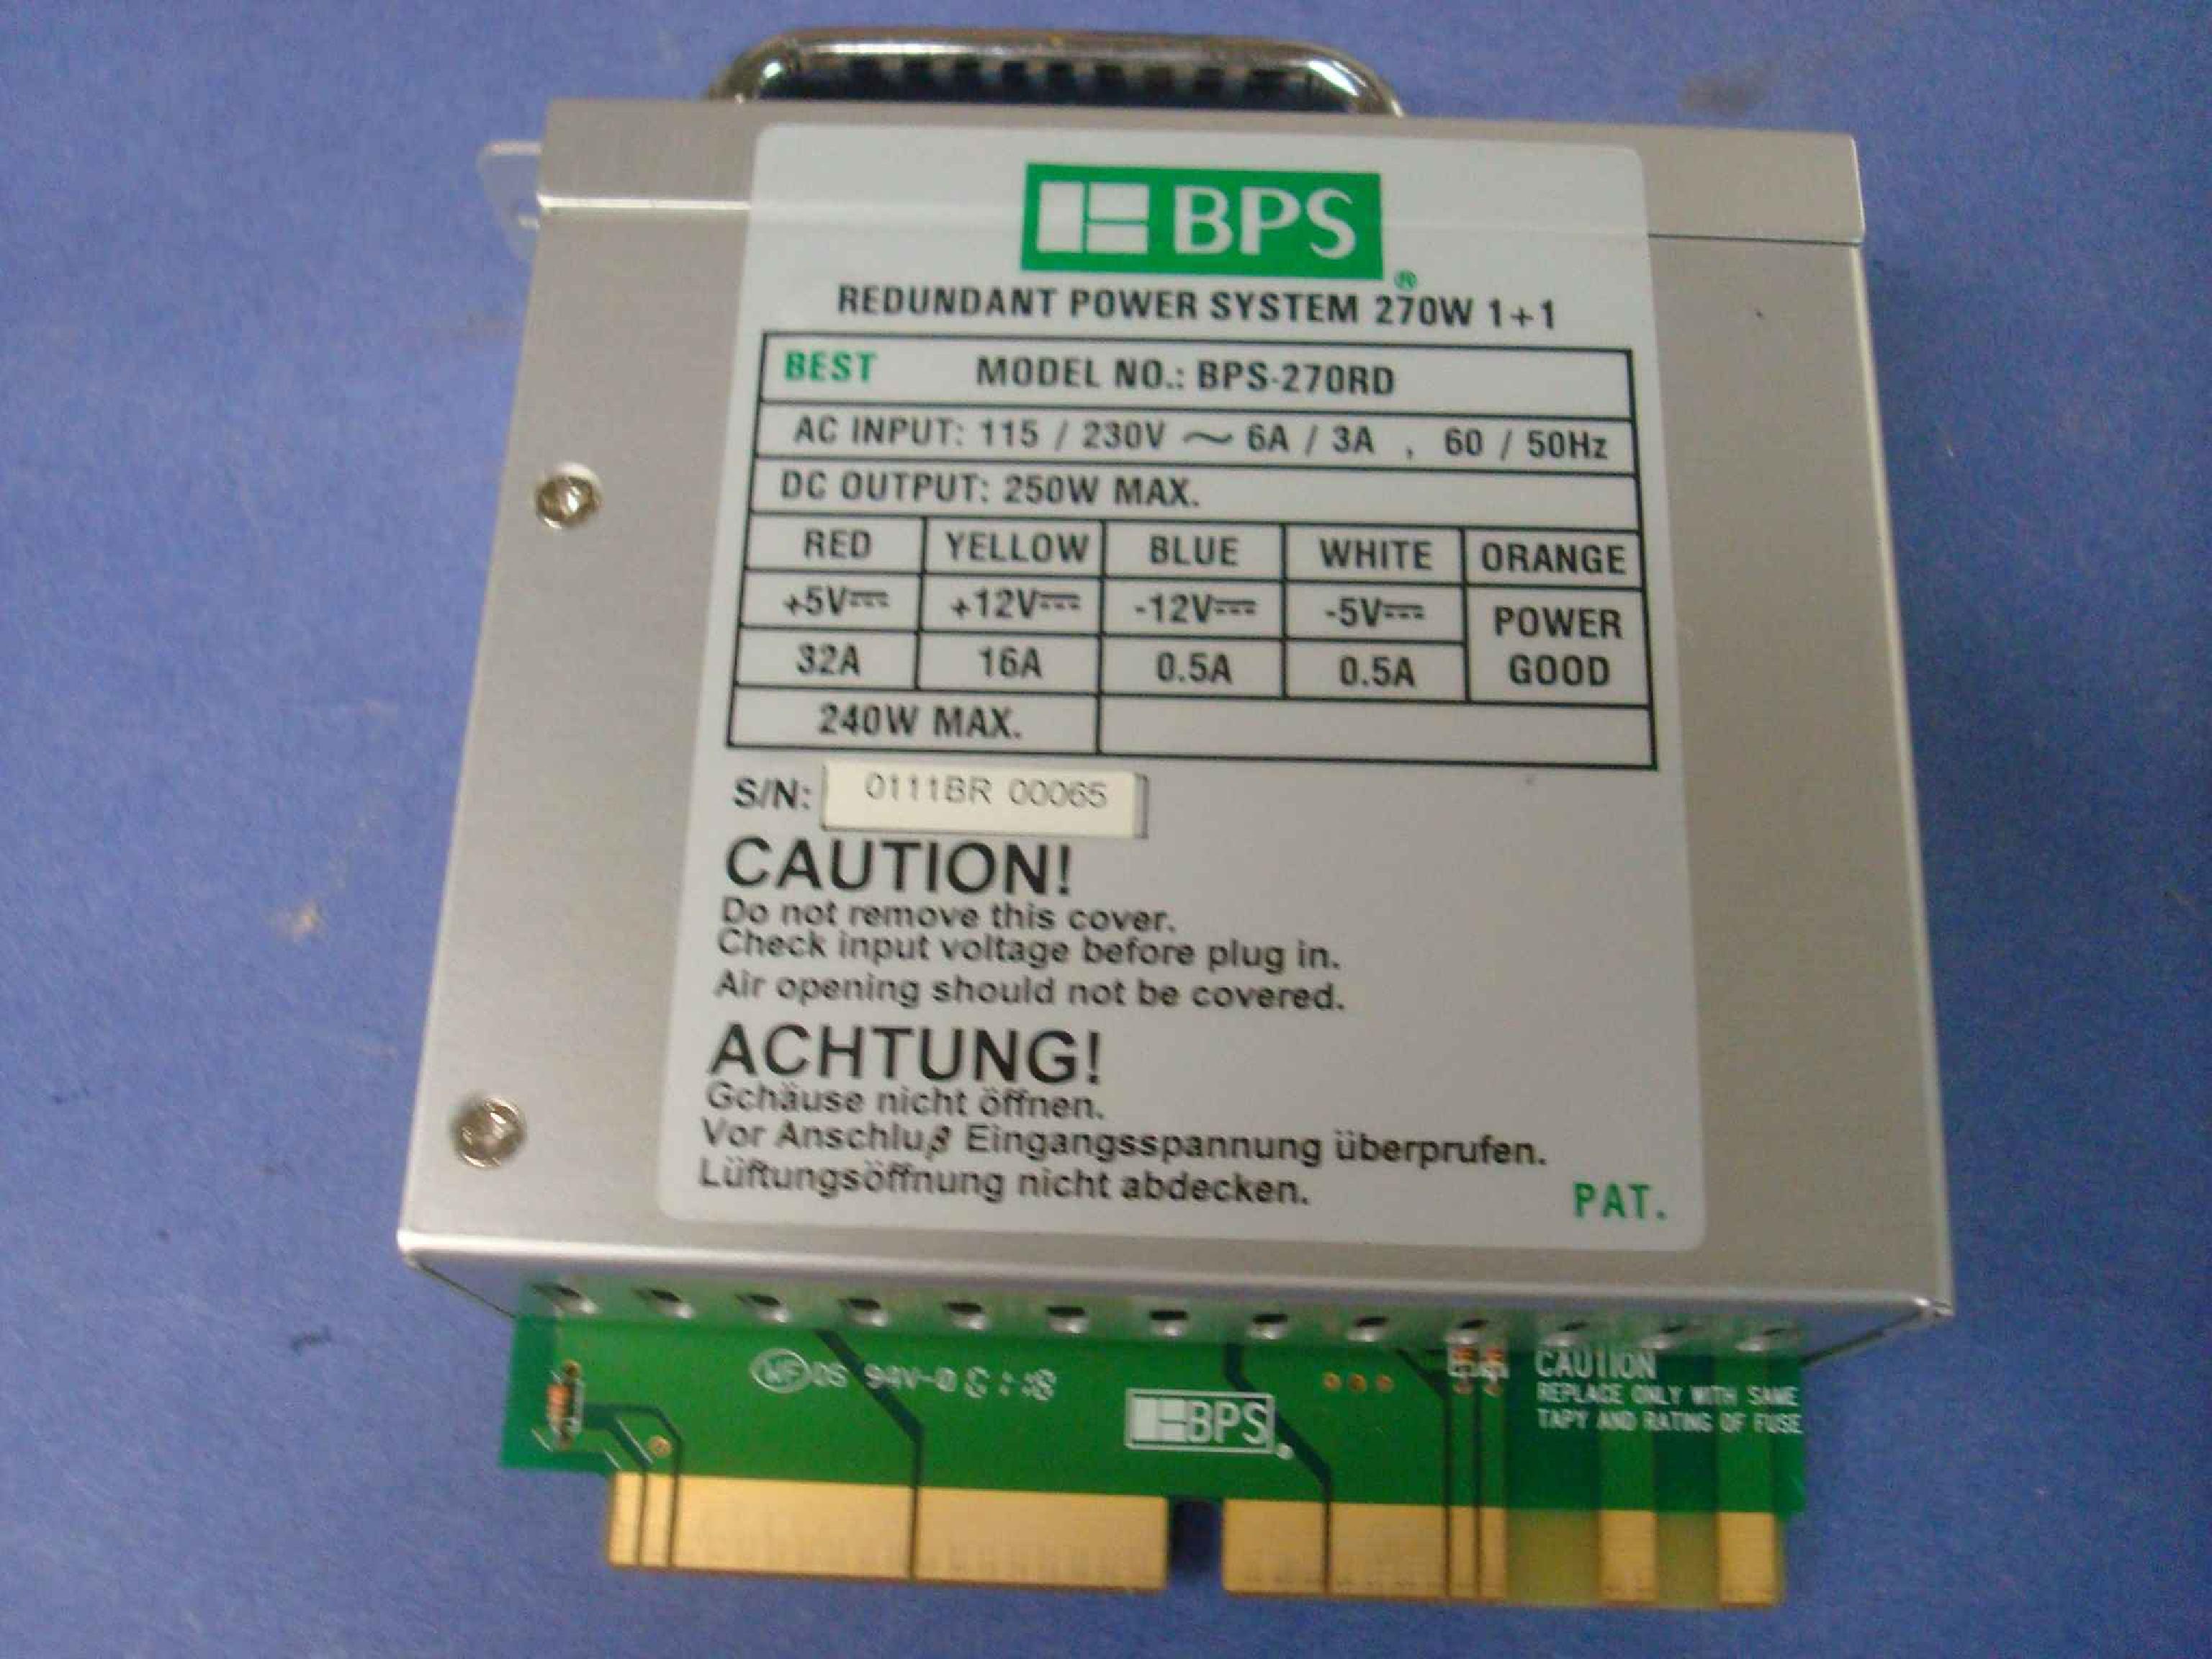 BPS PSA250DX-BP REDUNDANT POWER SUPPLY WITH TWO HOT SWAP MODULES